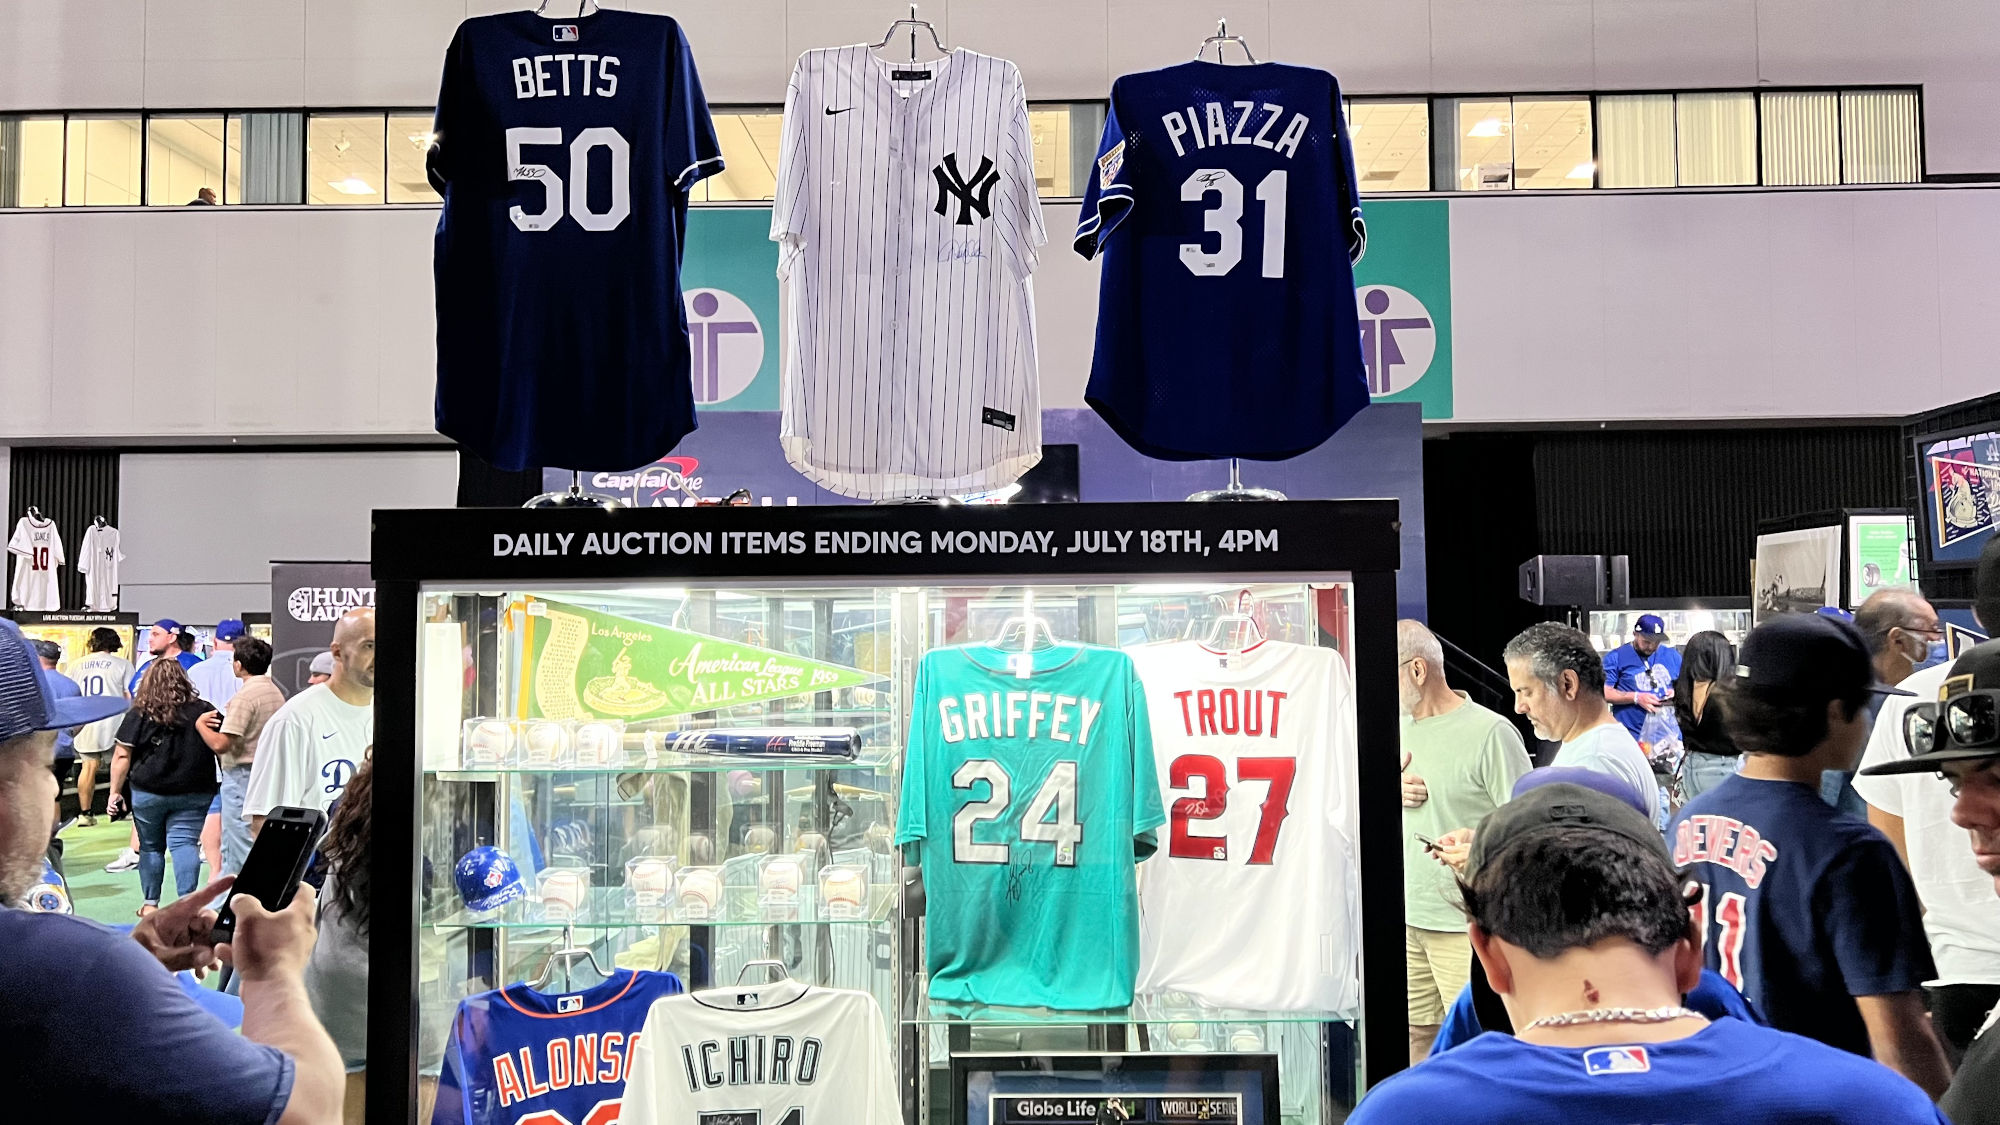 All Star Auctions Betts Piazza